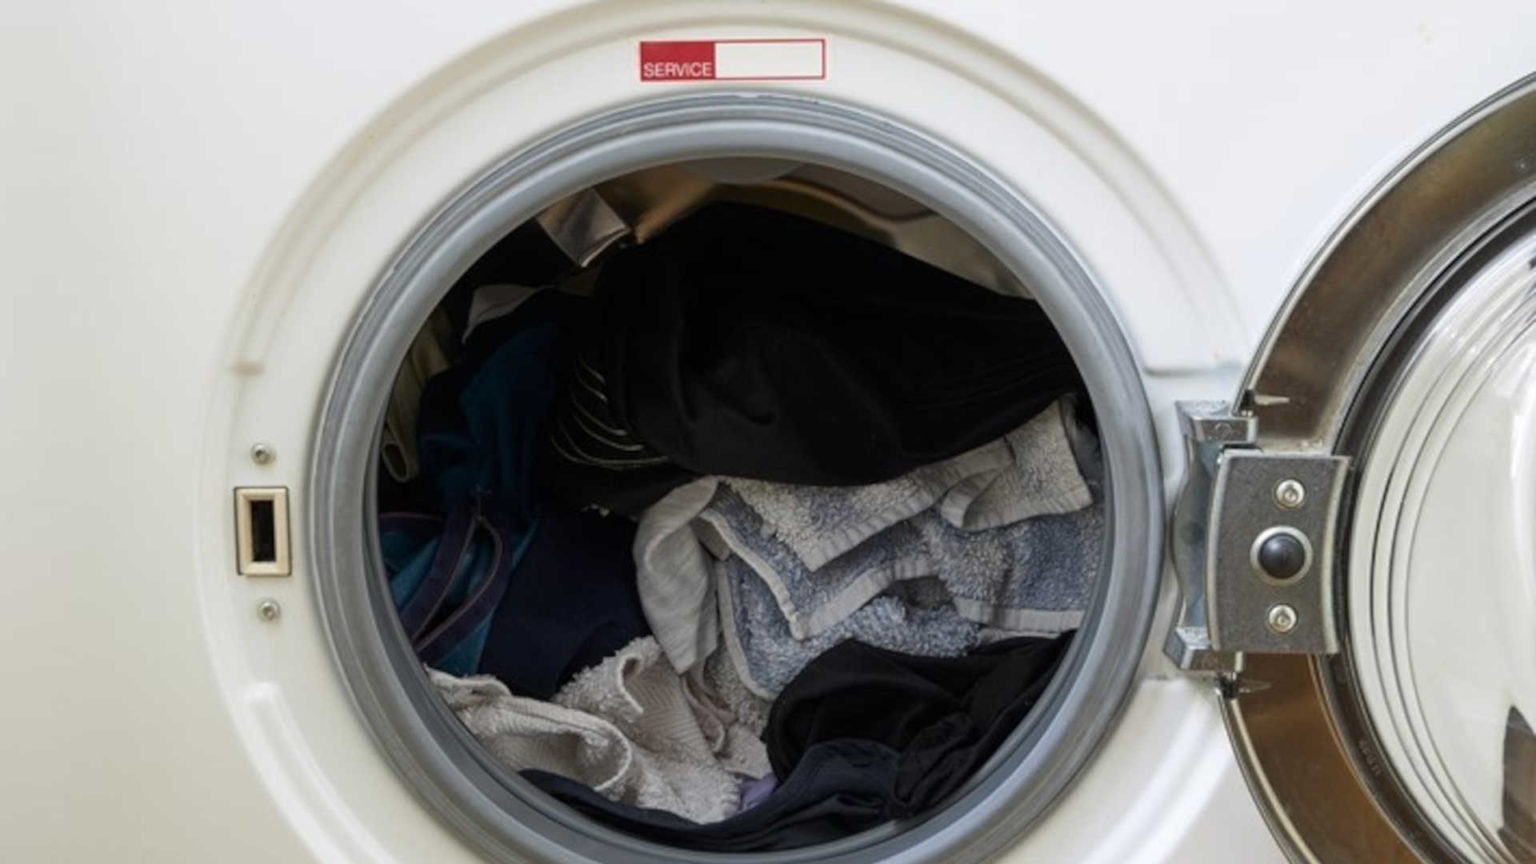 What Should You Never Put in a Washing Machine? | Liquid Laundromats